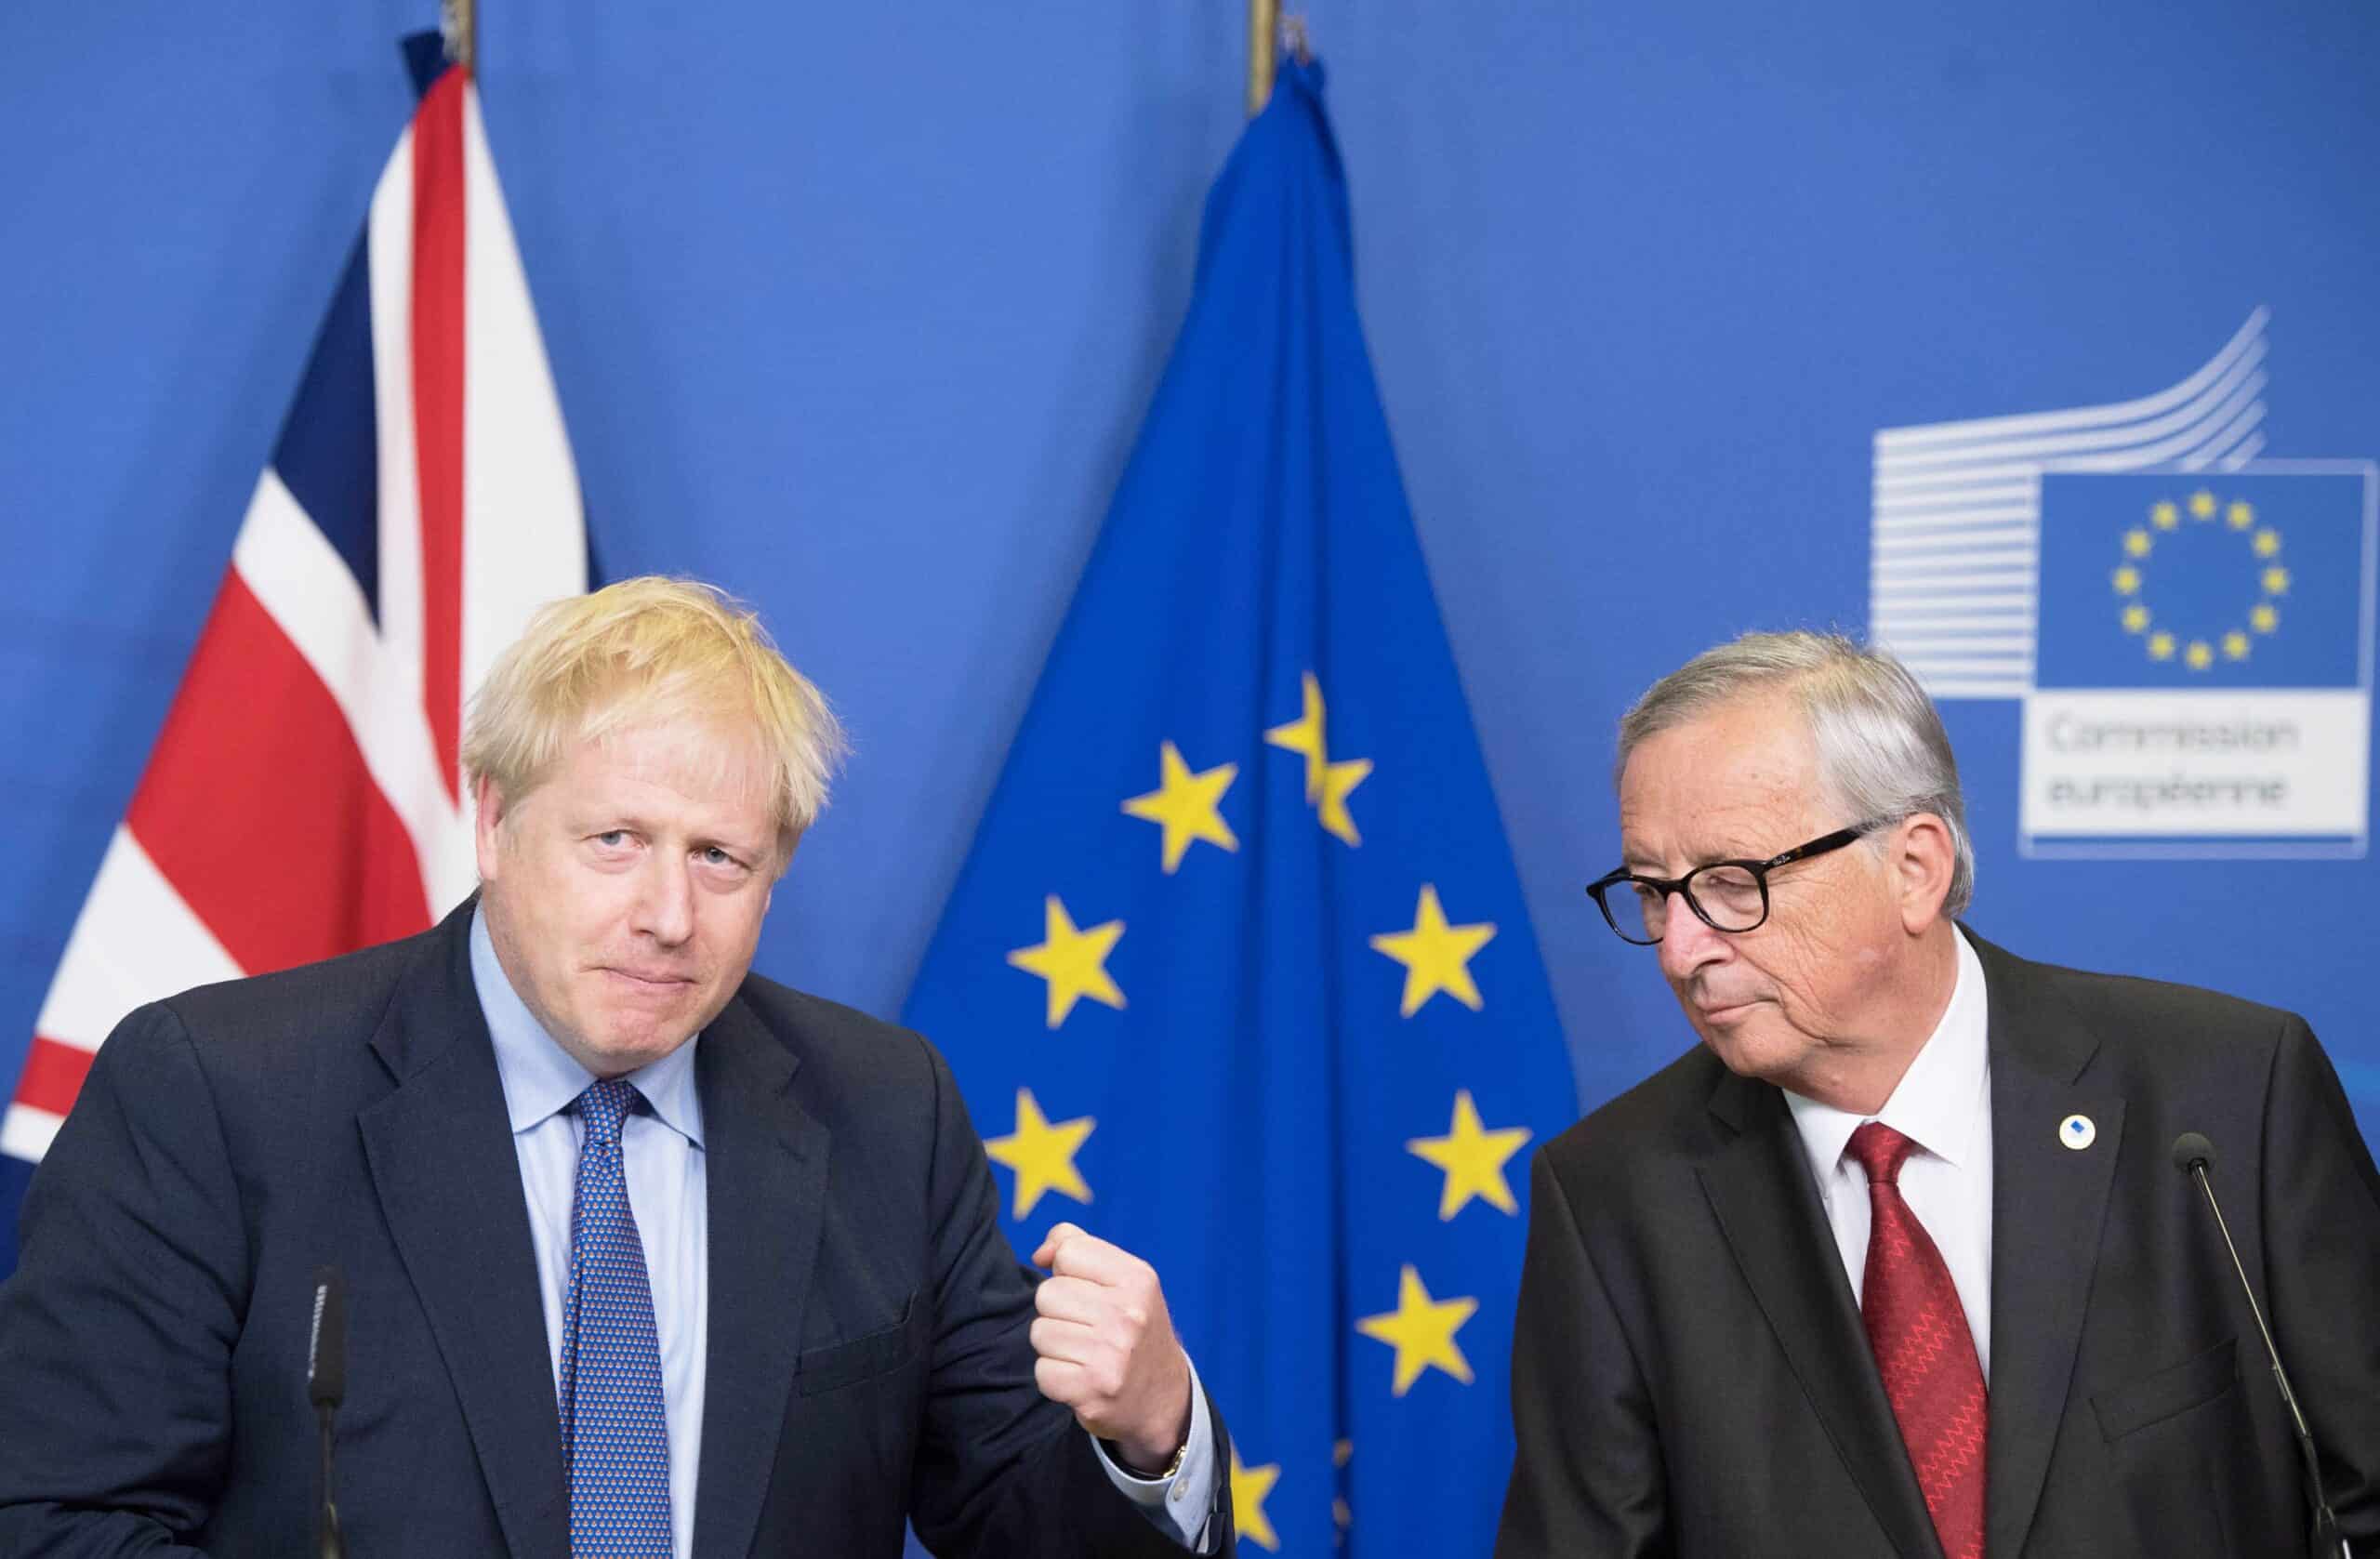 Boris is a ‘piece of work’ who ‘could have got a better deal if he’d been more precise’ – Juncker